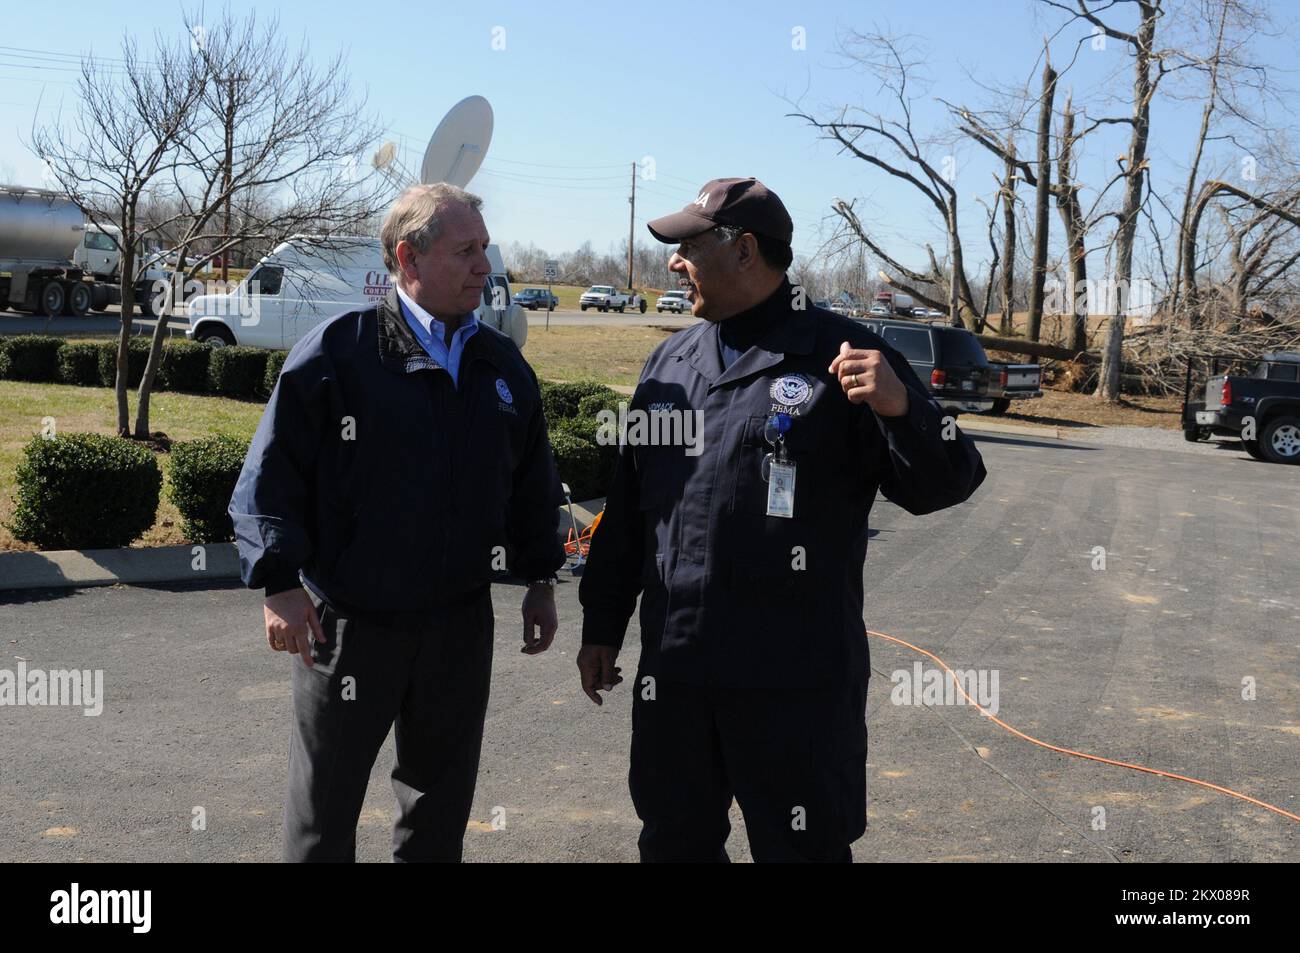 Regional Director Phil May and Emergency Response Officer Willie.. Photographs Relating to Disasters and Emergency Management Programs, Activities, and Officials Stock Photo